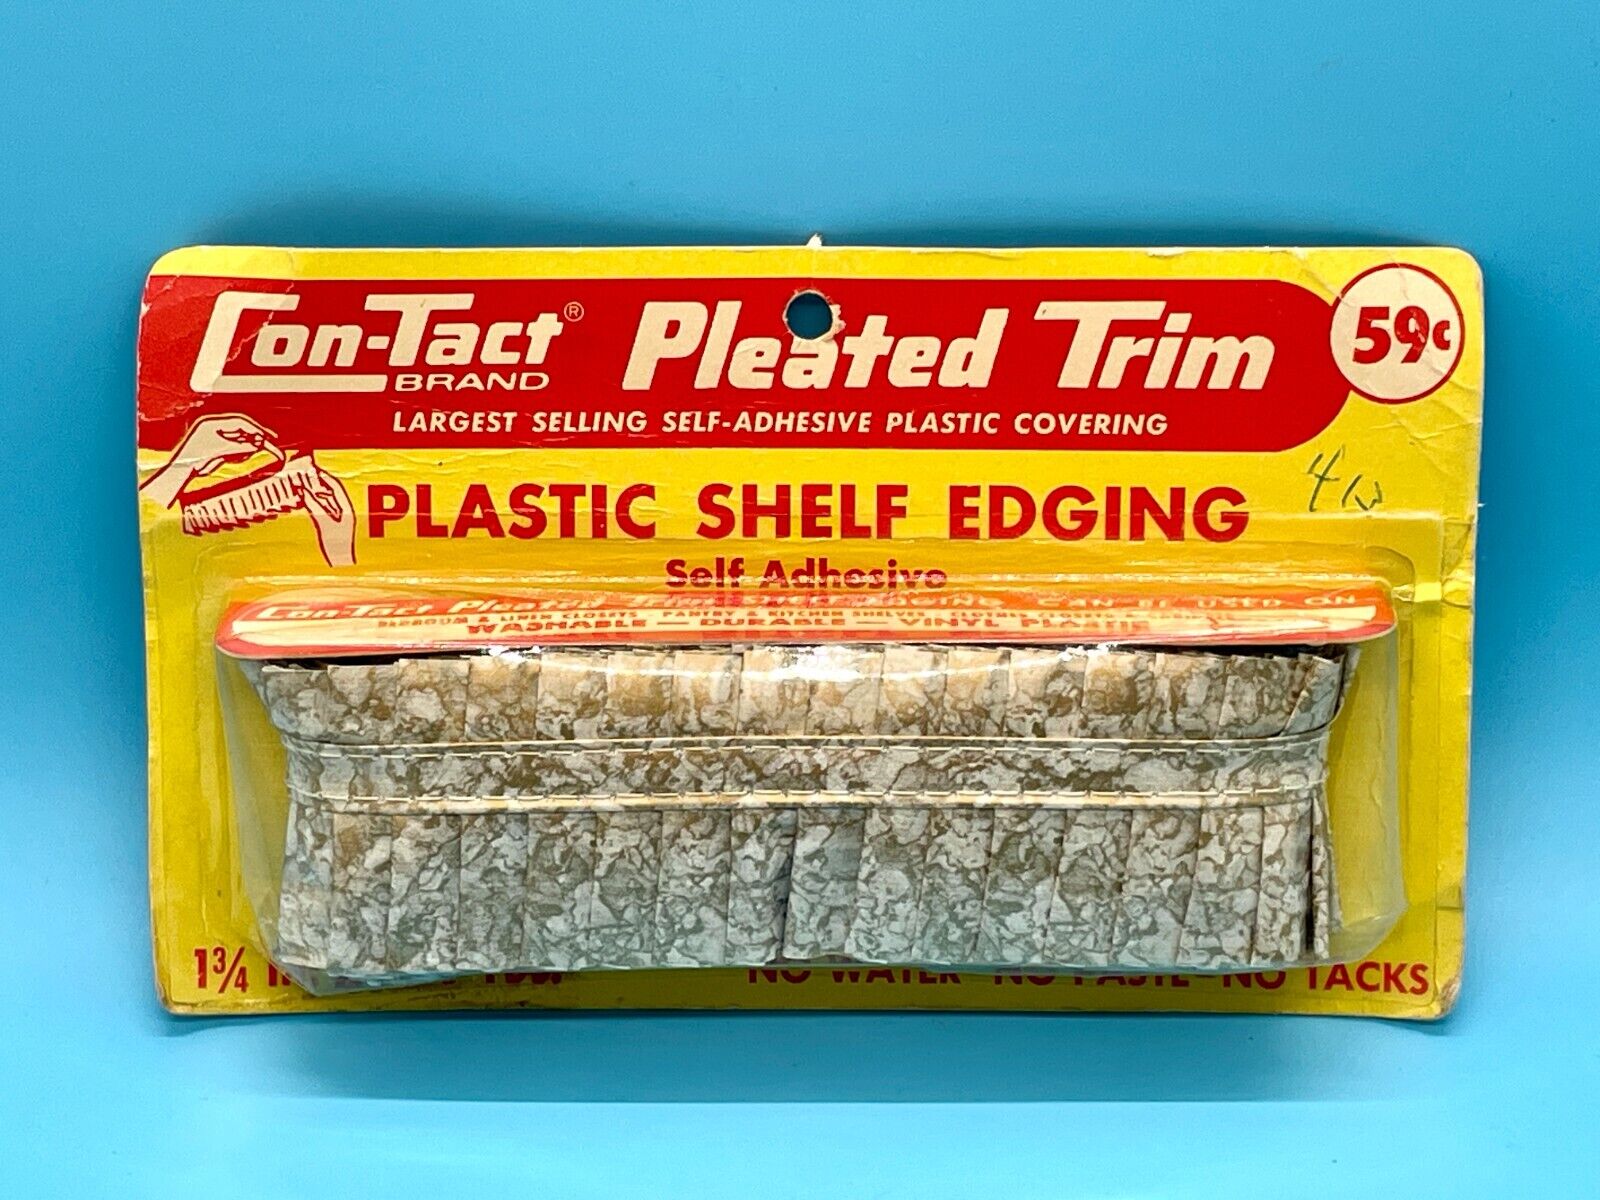 Con-Tact Pleated Trim Plastic Self-Adhesive Shelf Edging – You Pick – NEW